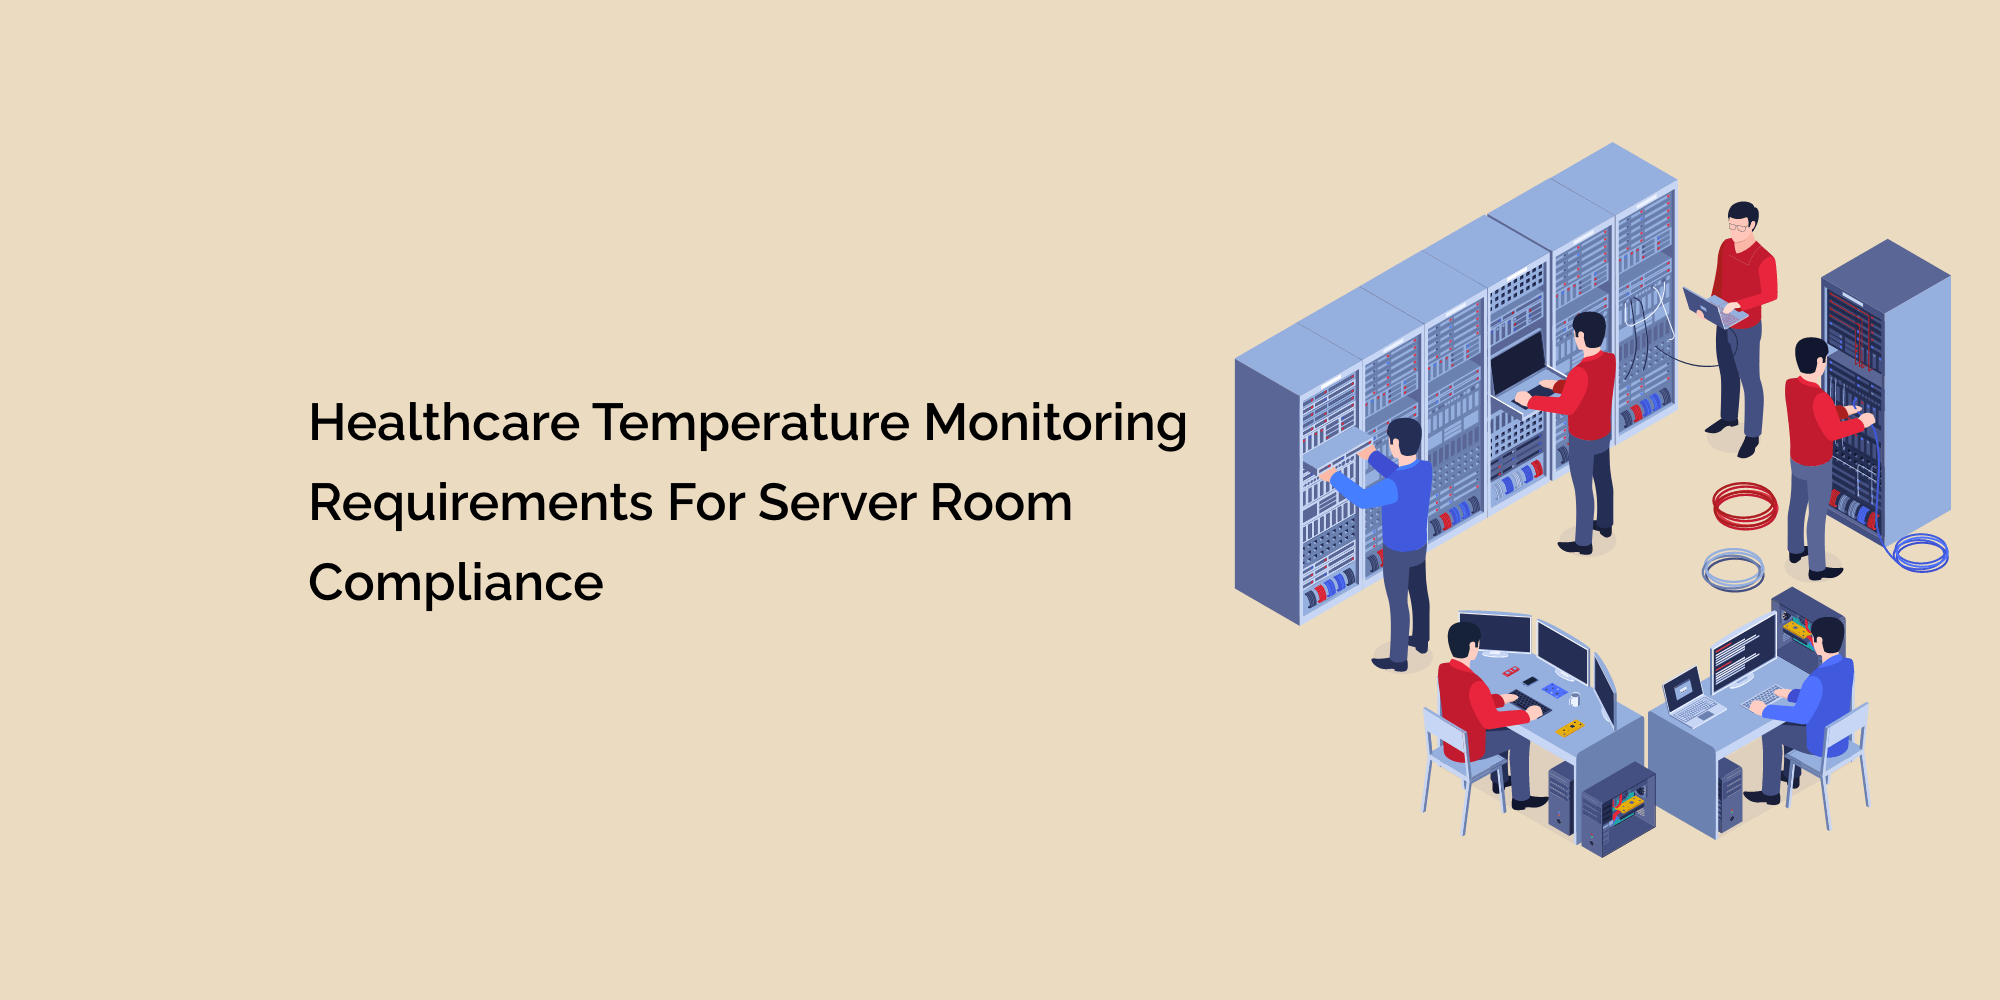 Healthcare Temperature Monitoring Requirements for Server Room Compliance